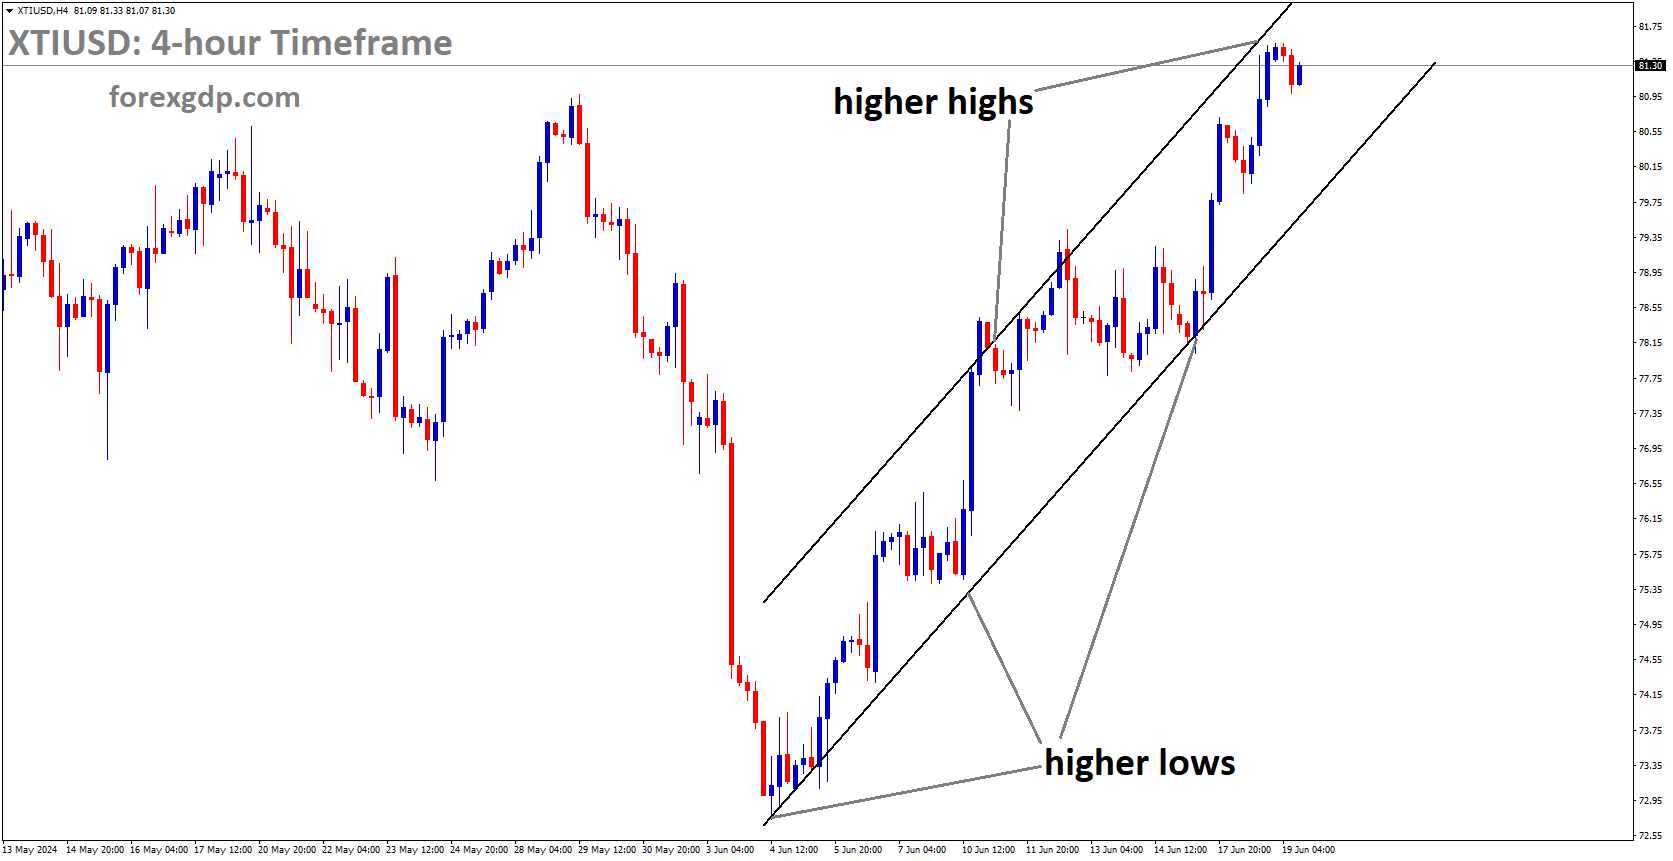 XTIUSD is moving in Ascending channel and market has reached higher high area of the channel